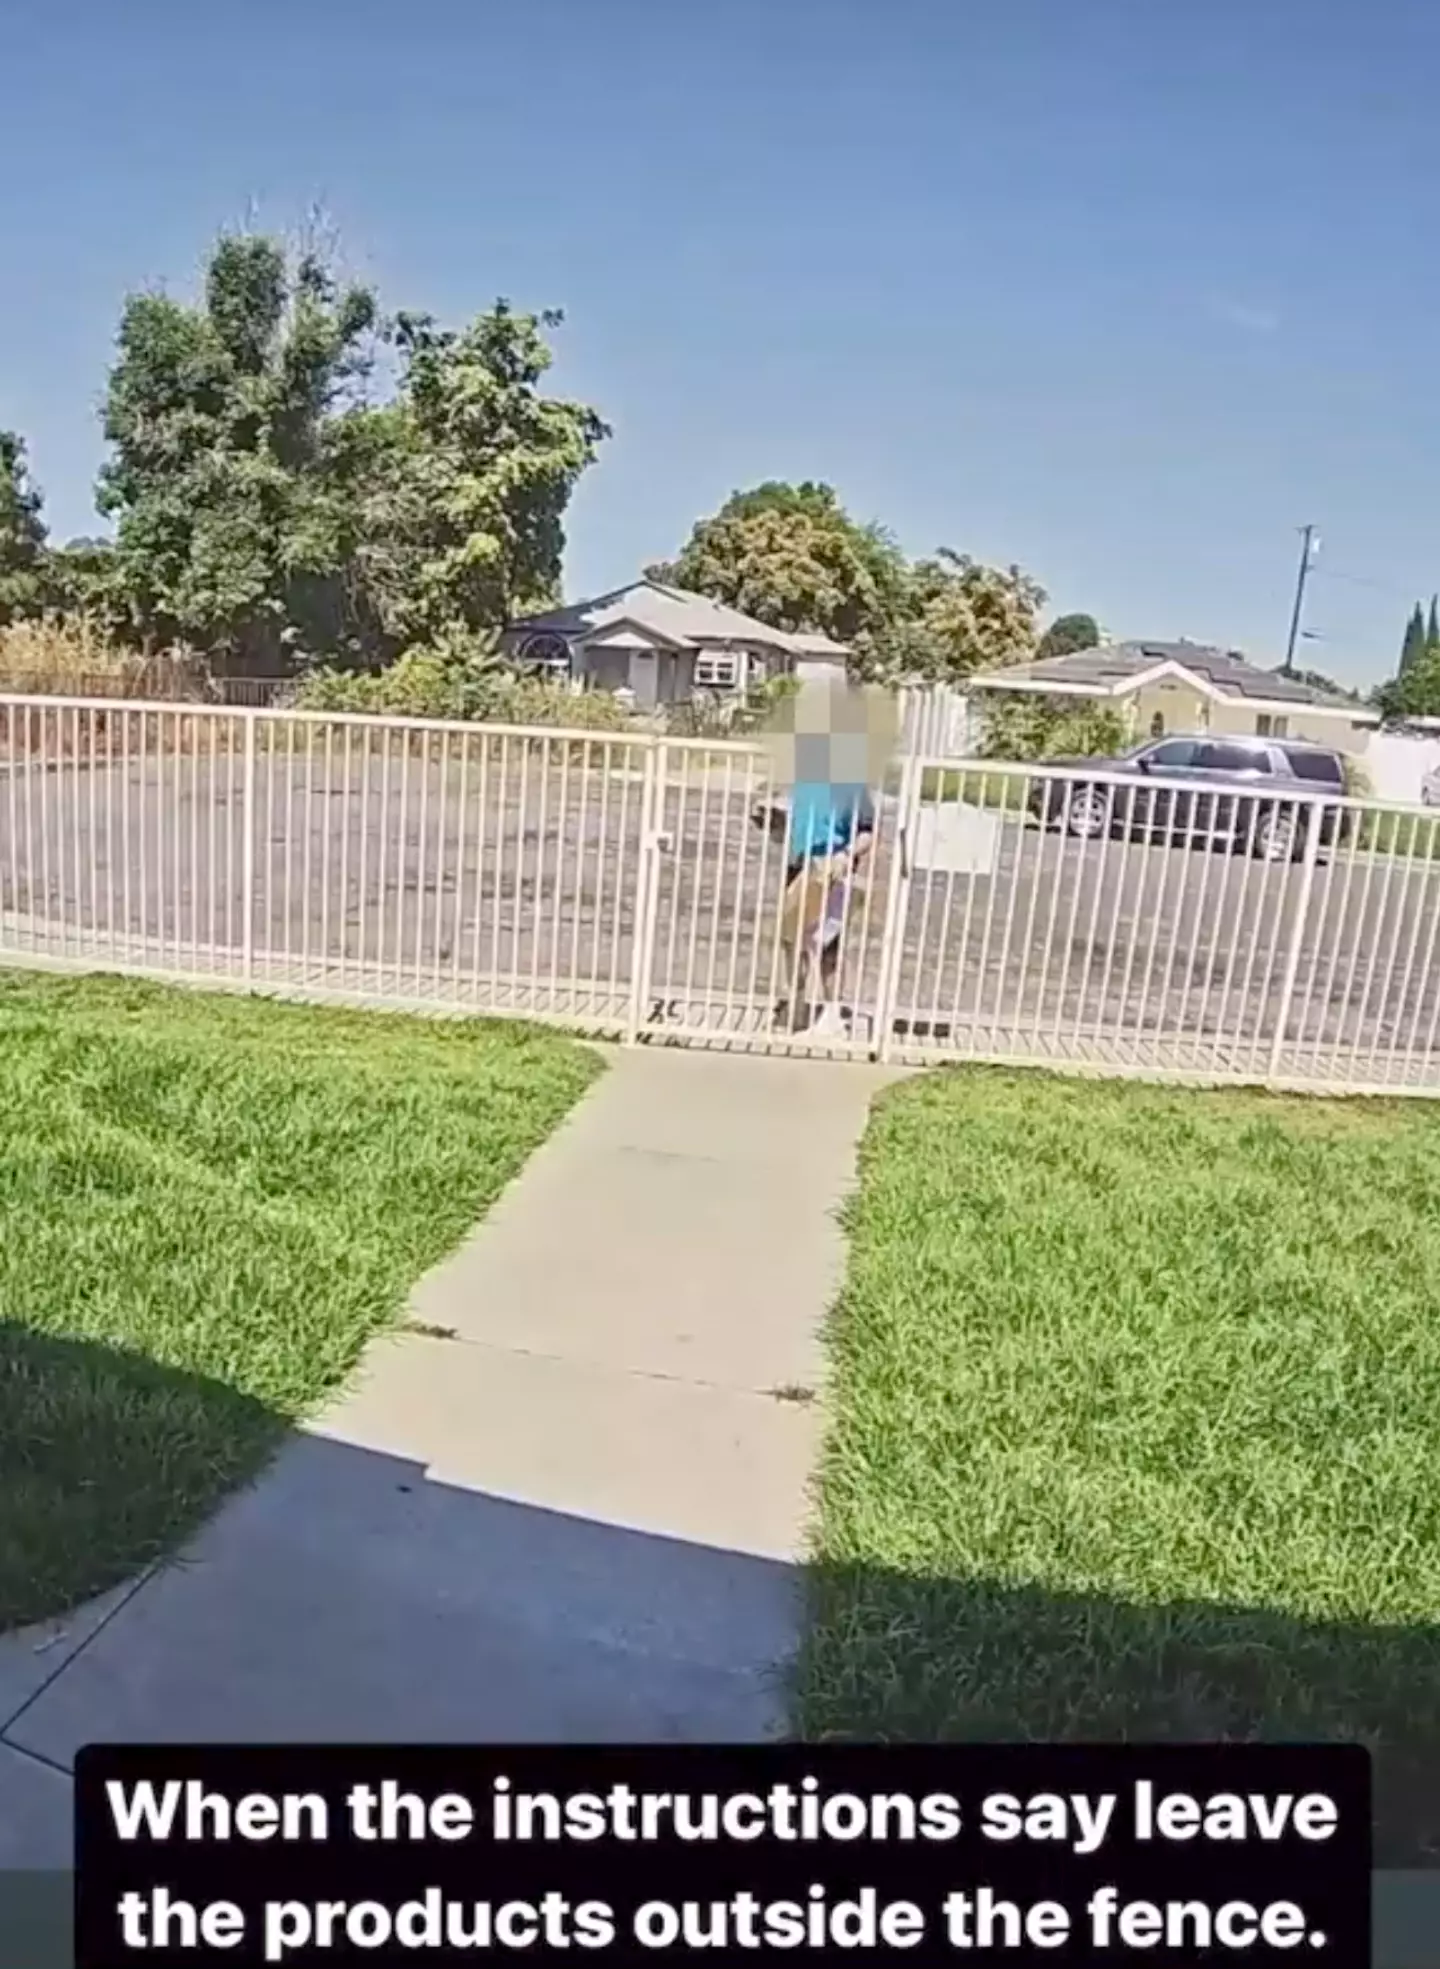 The delivery driver tries to carefully place the package on the ground.